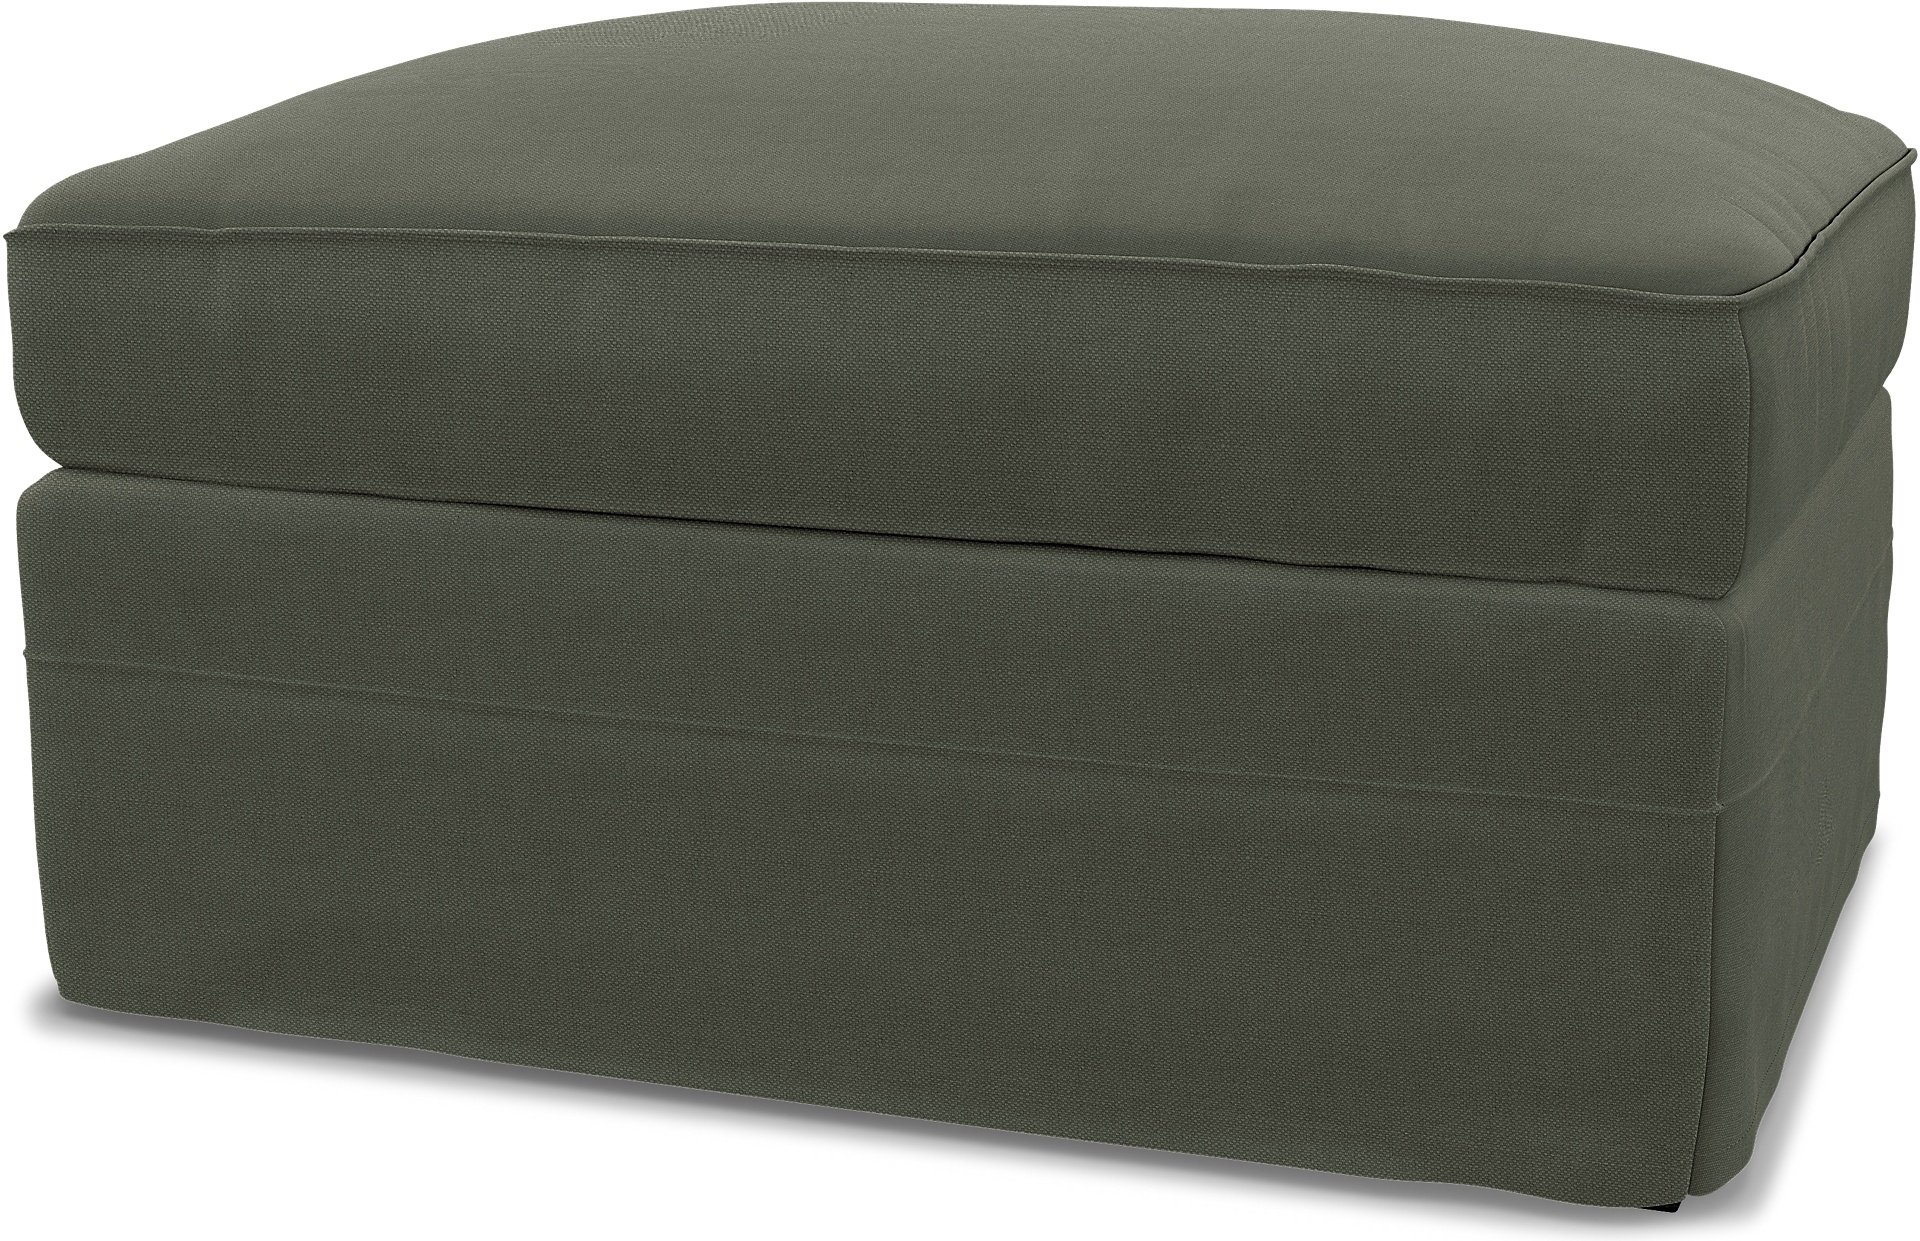 IKEA - Gronlid Footstool with Storage Cover, Rosemary, Linen - Bemz